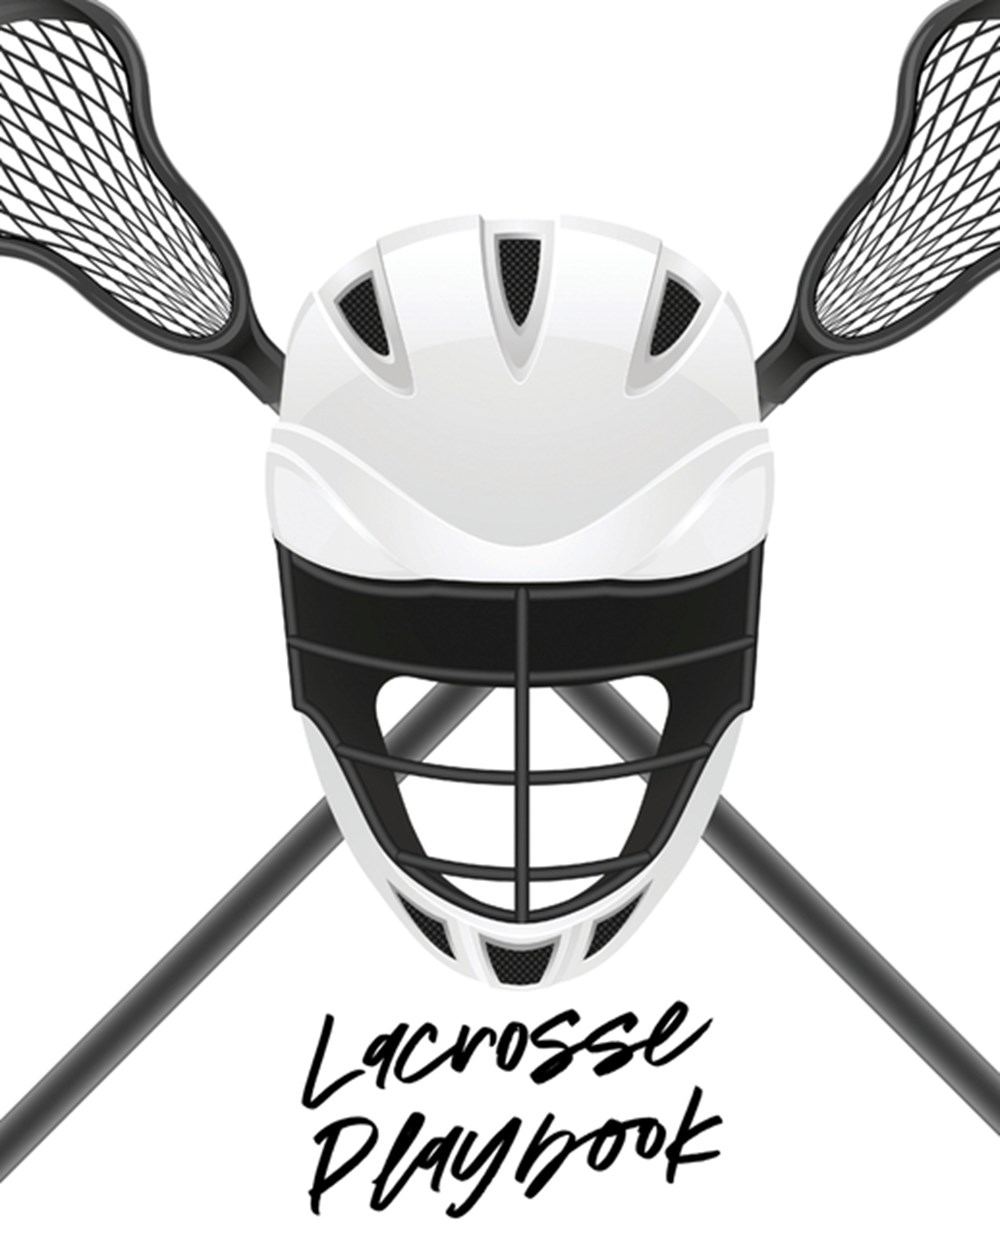 Lacrosse Playbook: For Players and Coaches - Outdoors - Team Sport